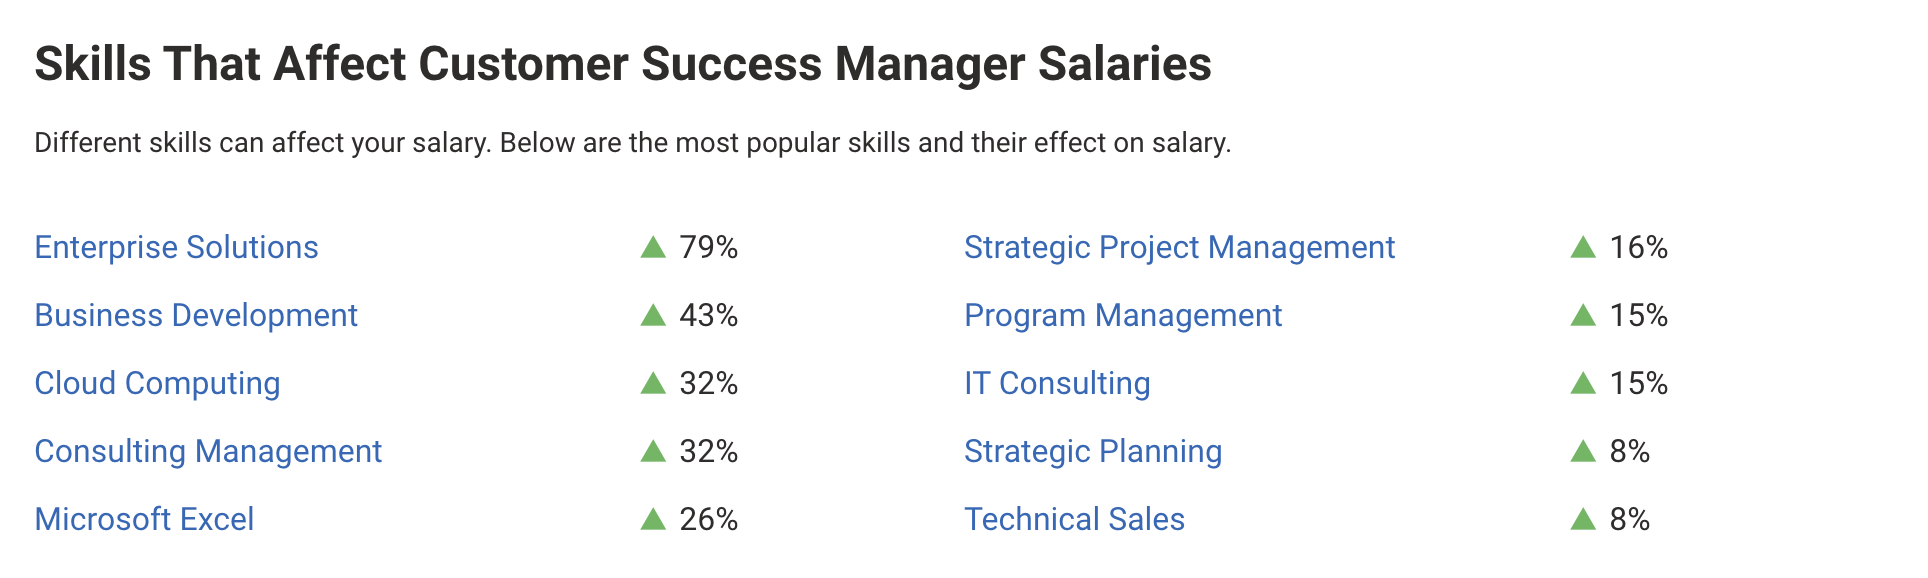 graphic showing skills that affect customer success manager salaries